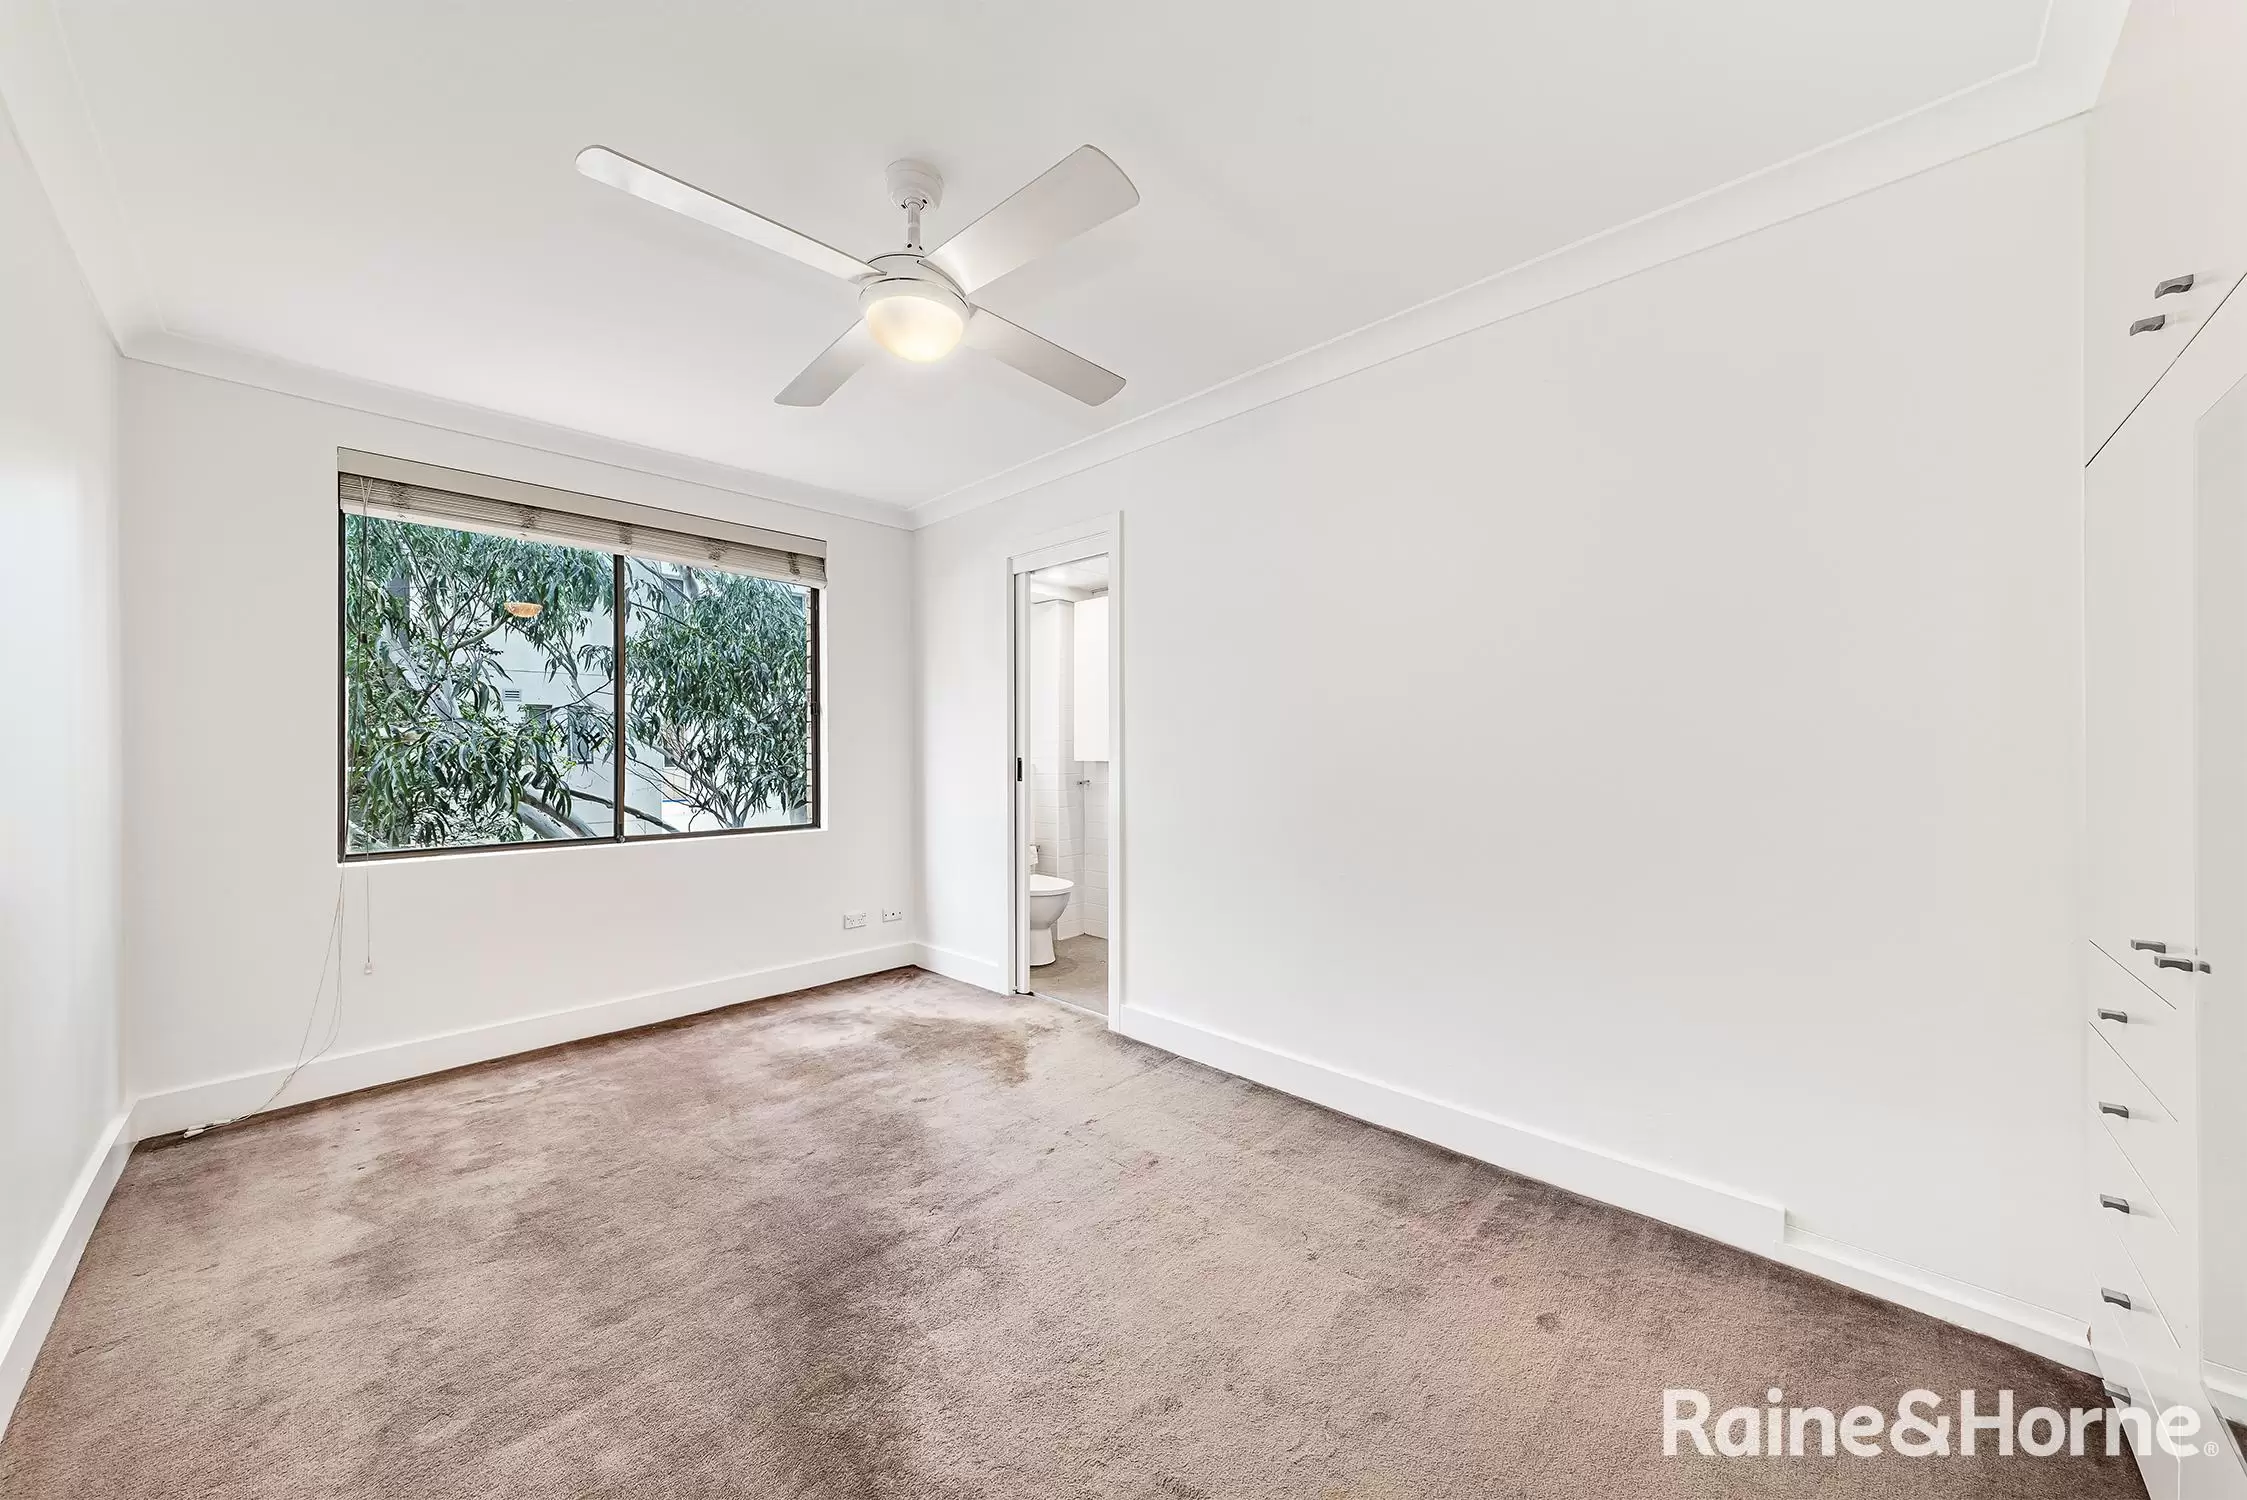 6/84 Melody Street, Coogee Leased by Raine & Horne Randwick | Coogee - image 5